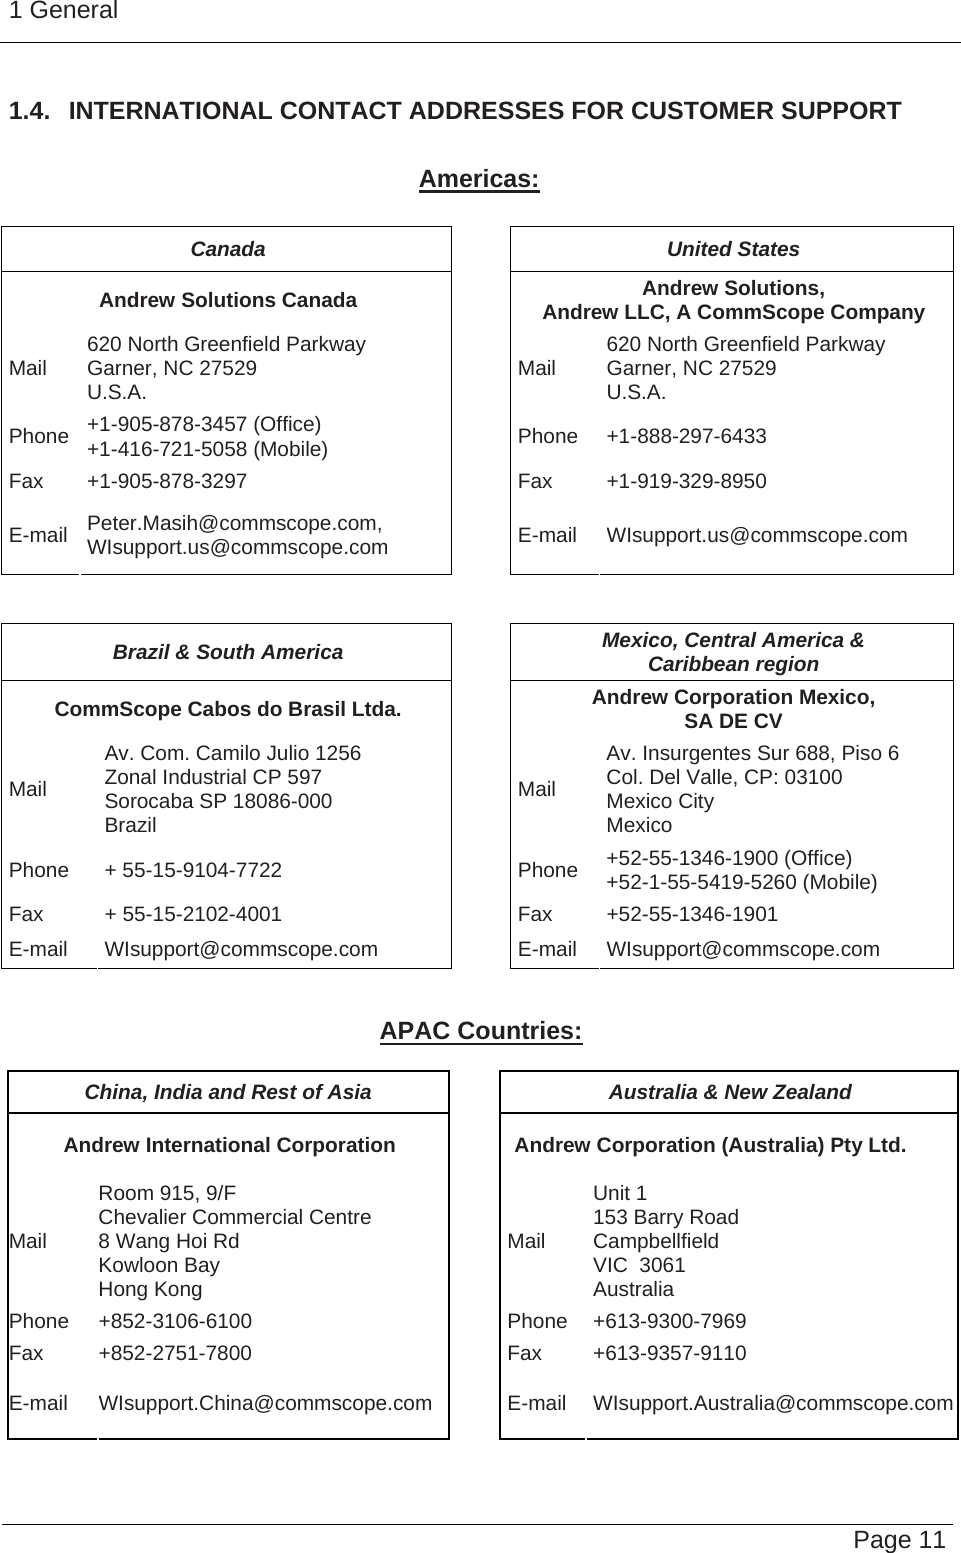 1 General   Page 11 1.4.  INTERNATIONAL CONTACT ADDRESSES FOR CUSTOMER SUPPORT  Americas:  Canada United States Andrew Solutions Canada  Andrew Solutions,  Andrew LLC, A CommScope Company Mail  620 North Greenfield Parkway Garner, NC 27529 U.S.A.  Mail  620 North Greenfield Parkway Garner, NC 27529 U.S.A. Phone  +1-905-878-3457 (Office) +1-416-721-5058 (Mobile) Phone +1-888-297-6433 Fax +1-905-878-3297  Fax  +1-919-329-8950 E-mail  Peter.Masih@commscope.com, WIsupport.us@commscope.com  E-mail WIsupport.us@commscope.com   Brazil &amp; South America  Mexico, Central America &amp;  Caribbean region CommScope Cabos do Brasil Ltda.  Andrew Corporation Mexico,  SA DE CV Mail Av. Com. Camilo Julio 1256 Zonal Industrial CP 597 Sorocaba SP 18086-000 Brazil Mail Av. Insurgentes Sur 688, Piso 6 Col. Del Valle, CP: 03100 Mexico City Mexico Phone + 55-15-9104-7722  Phone +52-55-1346-1900 (Office) +52-1-55-5419-5260 (Mobile) Fax + 55-15-2102-4001  Fax +52-55-1346-1901 E-mail WIsupport@commscope.com  E-mail WIsupport@commscope.com   APAC Countries:  China, India and Rest of Asia  Australia &amp; New Zealand Andrew International Corporation  Andrew Corporation (Australia) Pty Ltd. Mail Room 915, 9/F  Chevalier Commercial Centre 8 Wang Hoi Rd Kowloon Bay  Hong Kong Mail Unit 1 153 Barry Road Campbellfield  VIC  3061 Australia Phone +852-3106-6100  Phone +613-9300-7969 Fax +852-2751-7800  Fax +613-9357-9110 E-mail WIsupport.China@commscope.com  E-mail WIsupport.Australia@commscope.com 